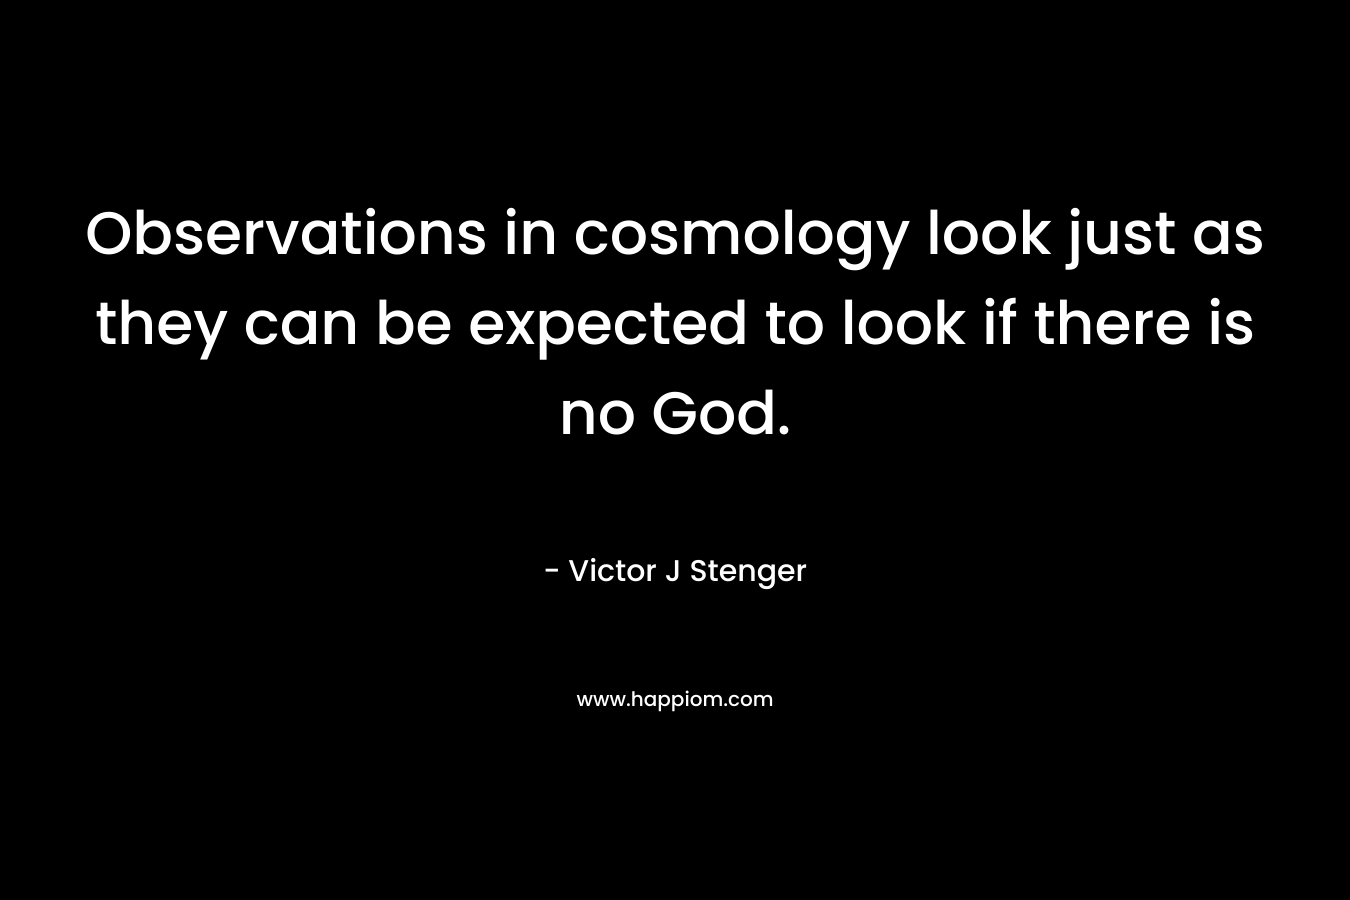 Observations in cosmology look just as they can be expected to look if there is no God.